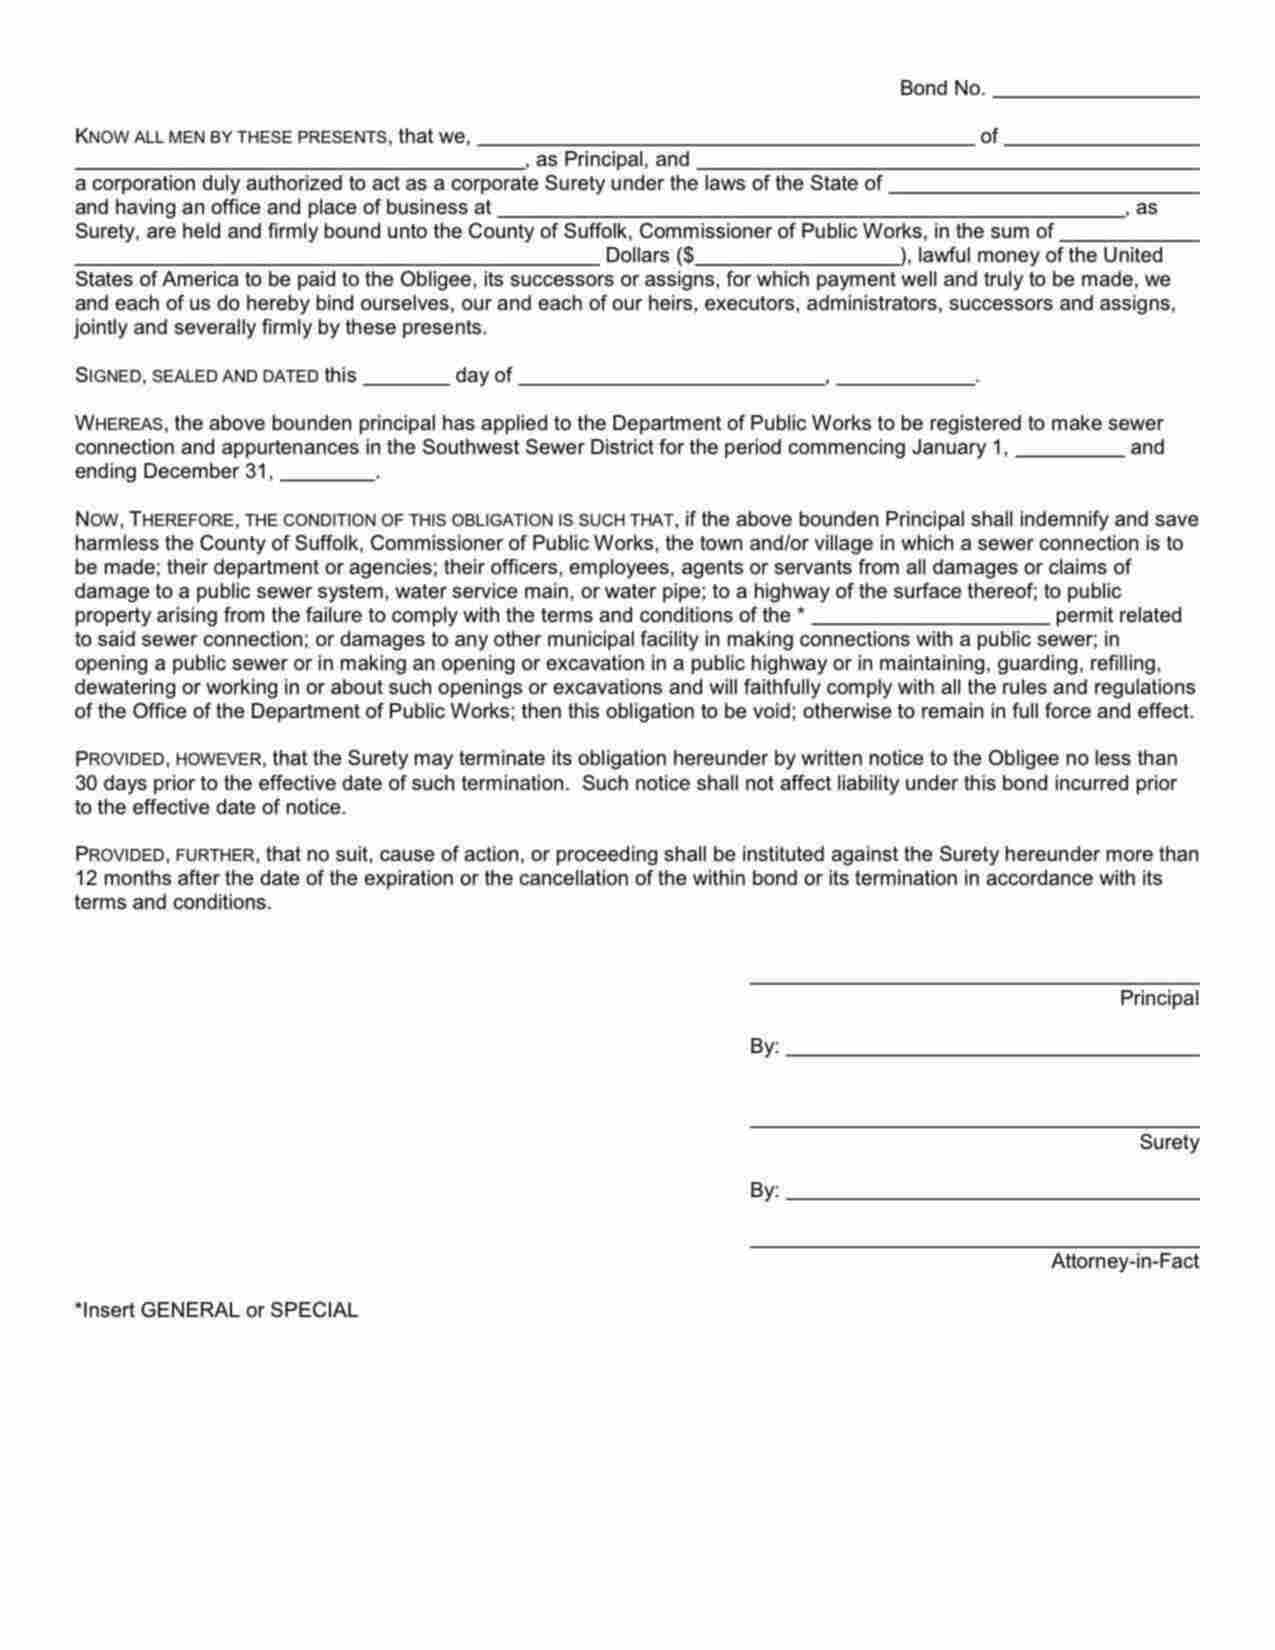 New York Sewer Connection - General Permit Bond Form